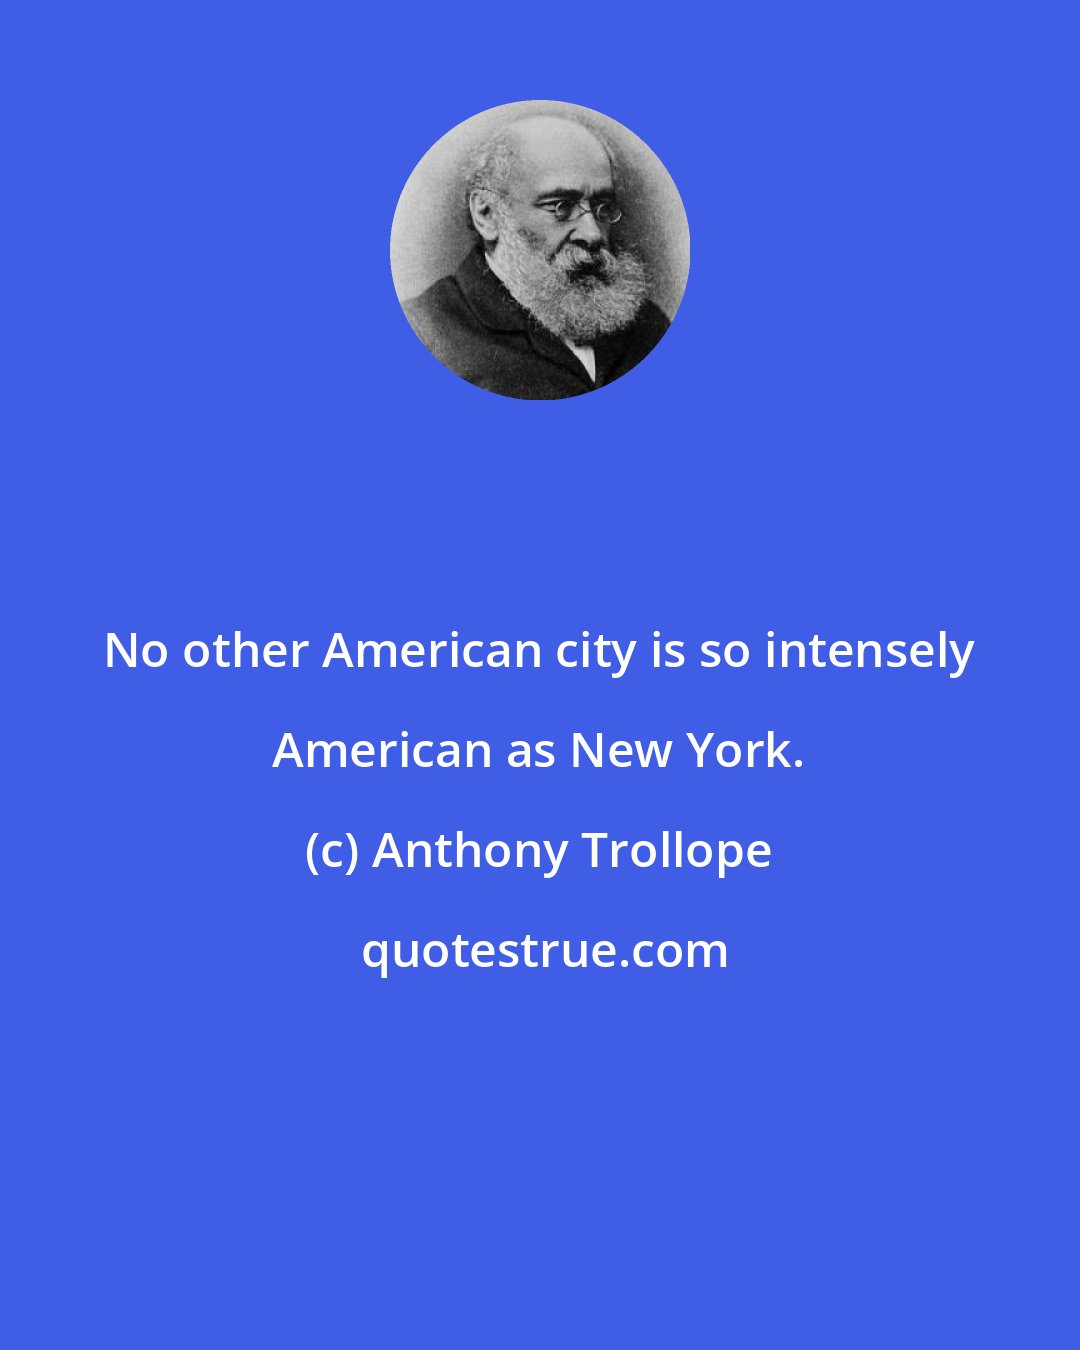 Anthony Trollope: No other American city is so intensely American as New York.